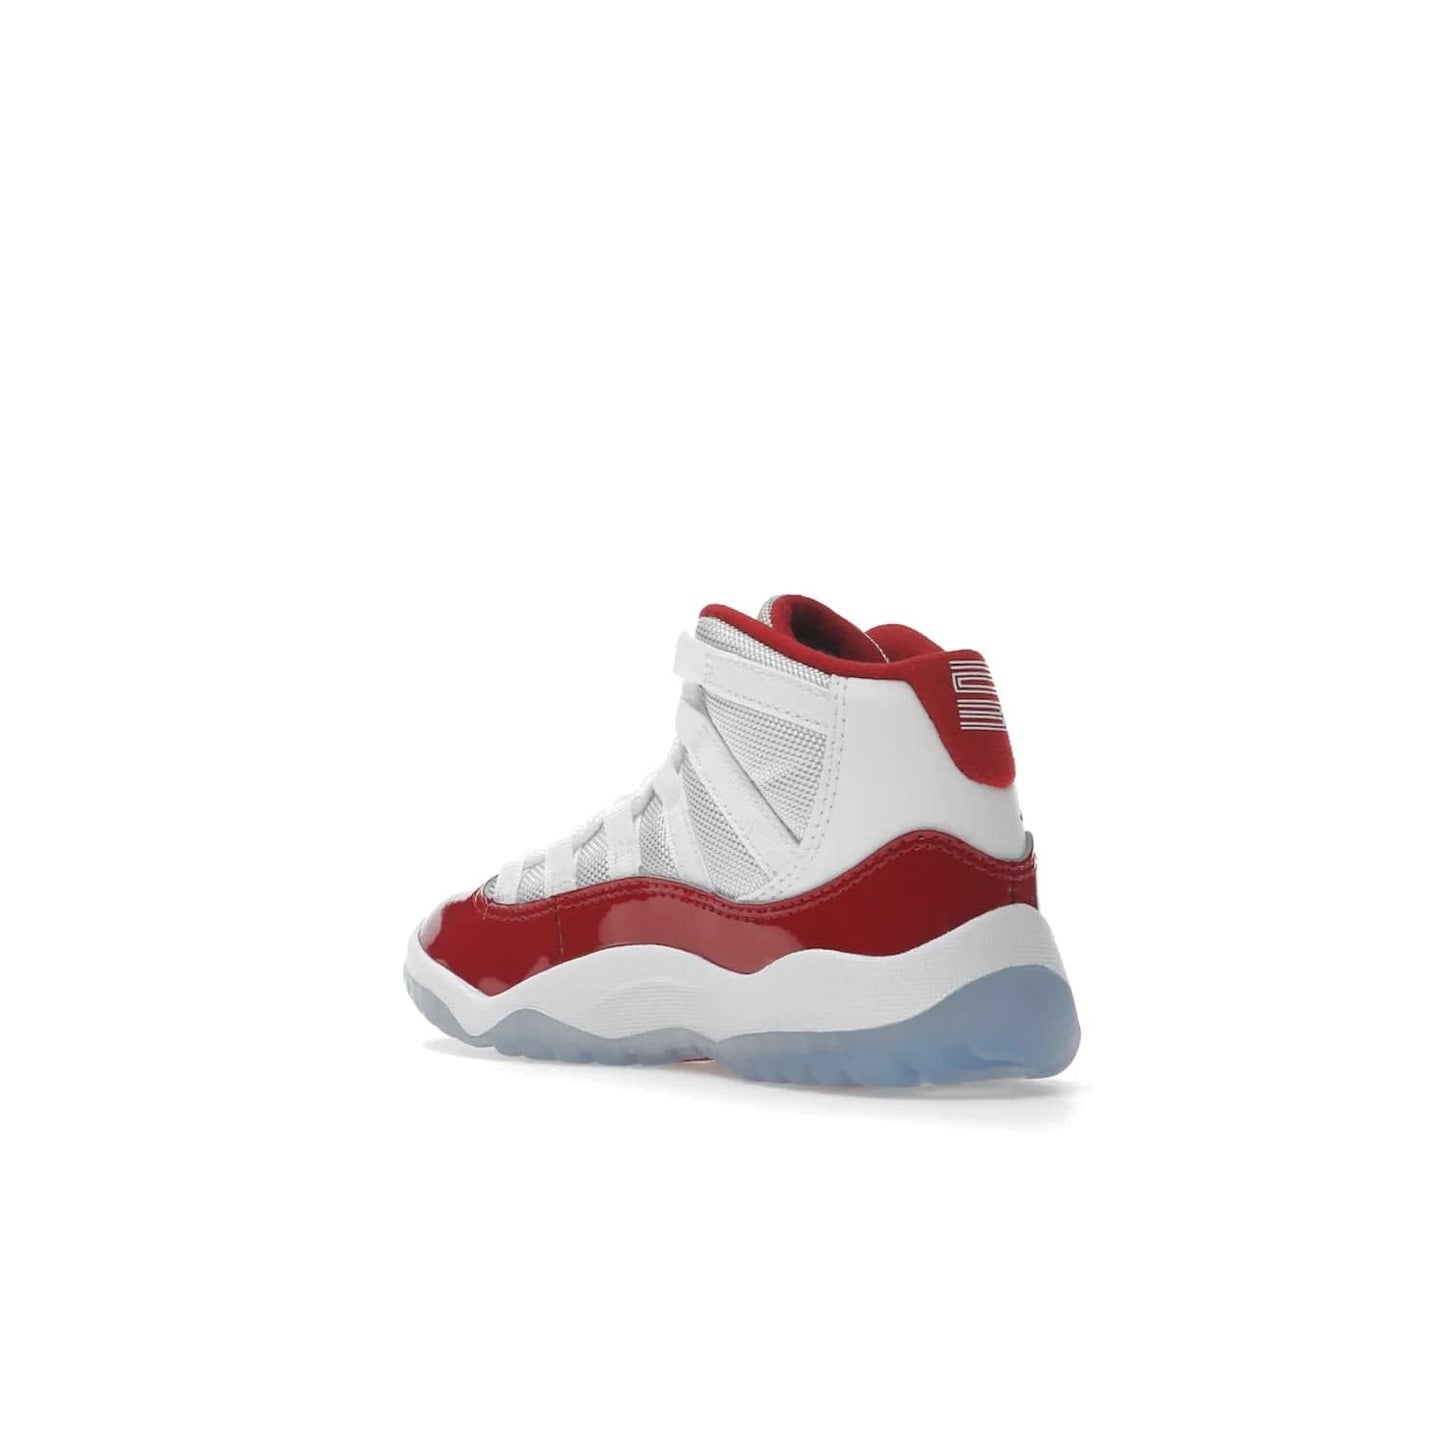 Jordan 11 Retro Cherry (2022) (PS) - Image 24 - Only at www.BallersClubKickz.com - An iconic silhouette with a timeless look, the Air Jordan 11 Retro Cherry 2022 PS features a crisp White, Varsity Red and Black colorway. The upper is made of ballistic mesh, a red patent leather mudguard, '23' branding and white Phylon midsole. Get optimal cushioning and comfort on December 10th, 2022. Don't miss out.